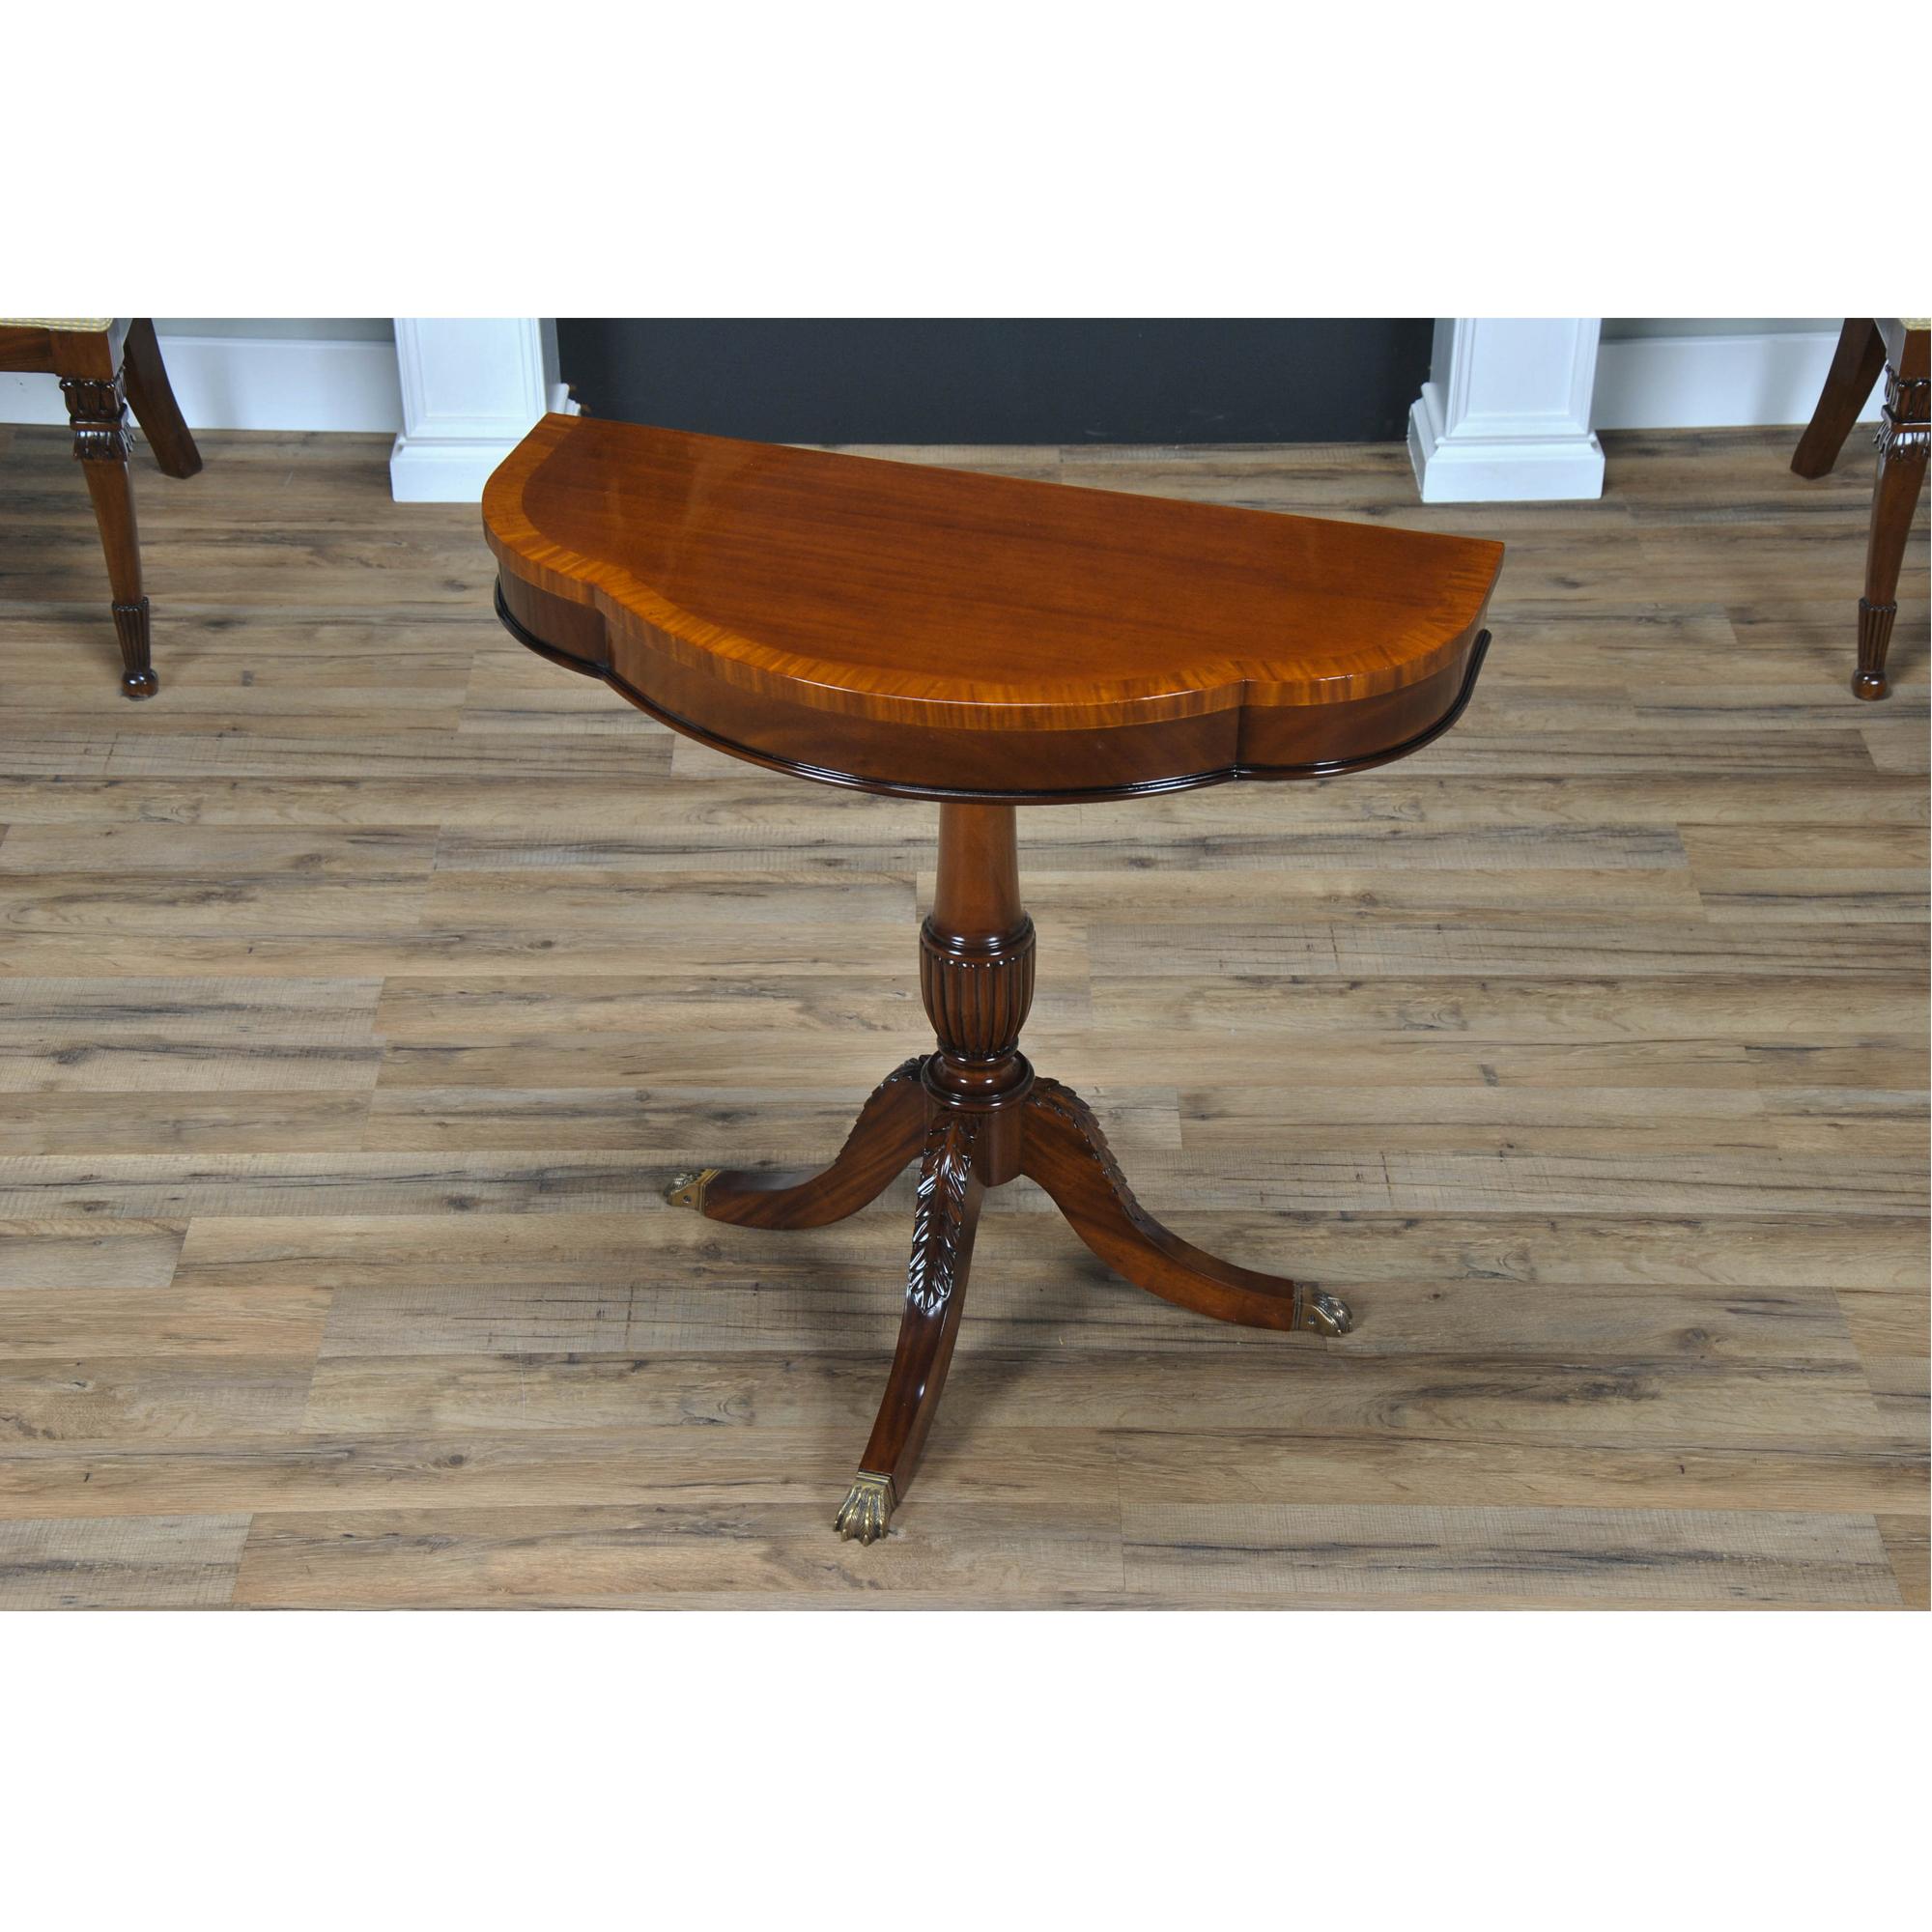 A great value this high quality Duncan Phyfe Console has made the top sellers list for years. Based on an antique design our reproduction console features a shaped mahogany top with satinwood banding is fastened on a central column with three hand